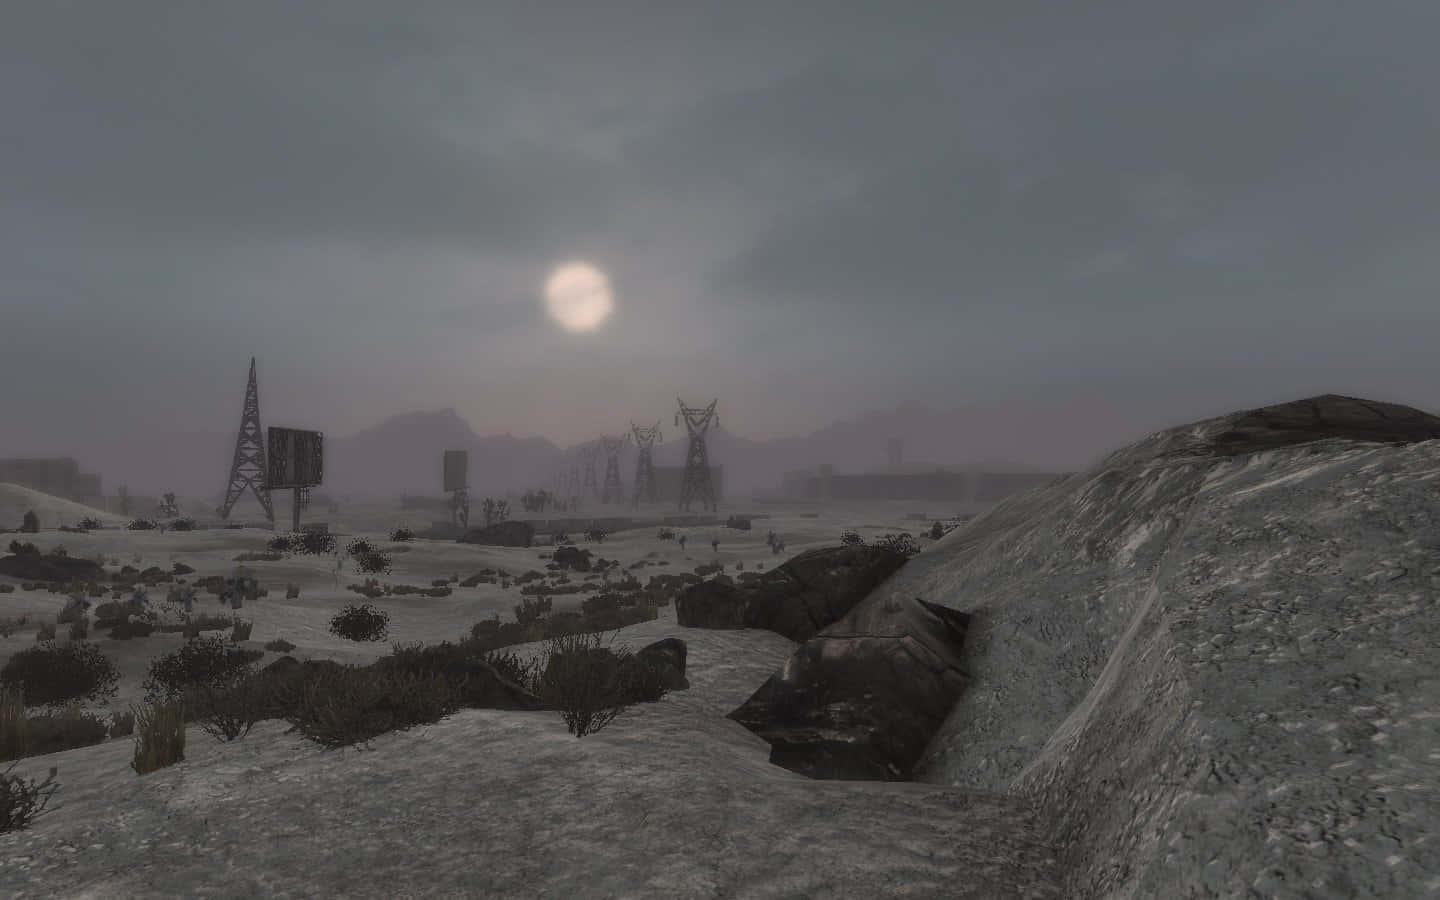 A chilling view of a nuclear winter landscape. Wallpaper